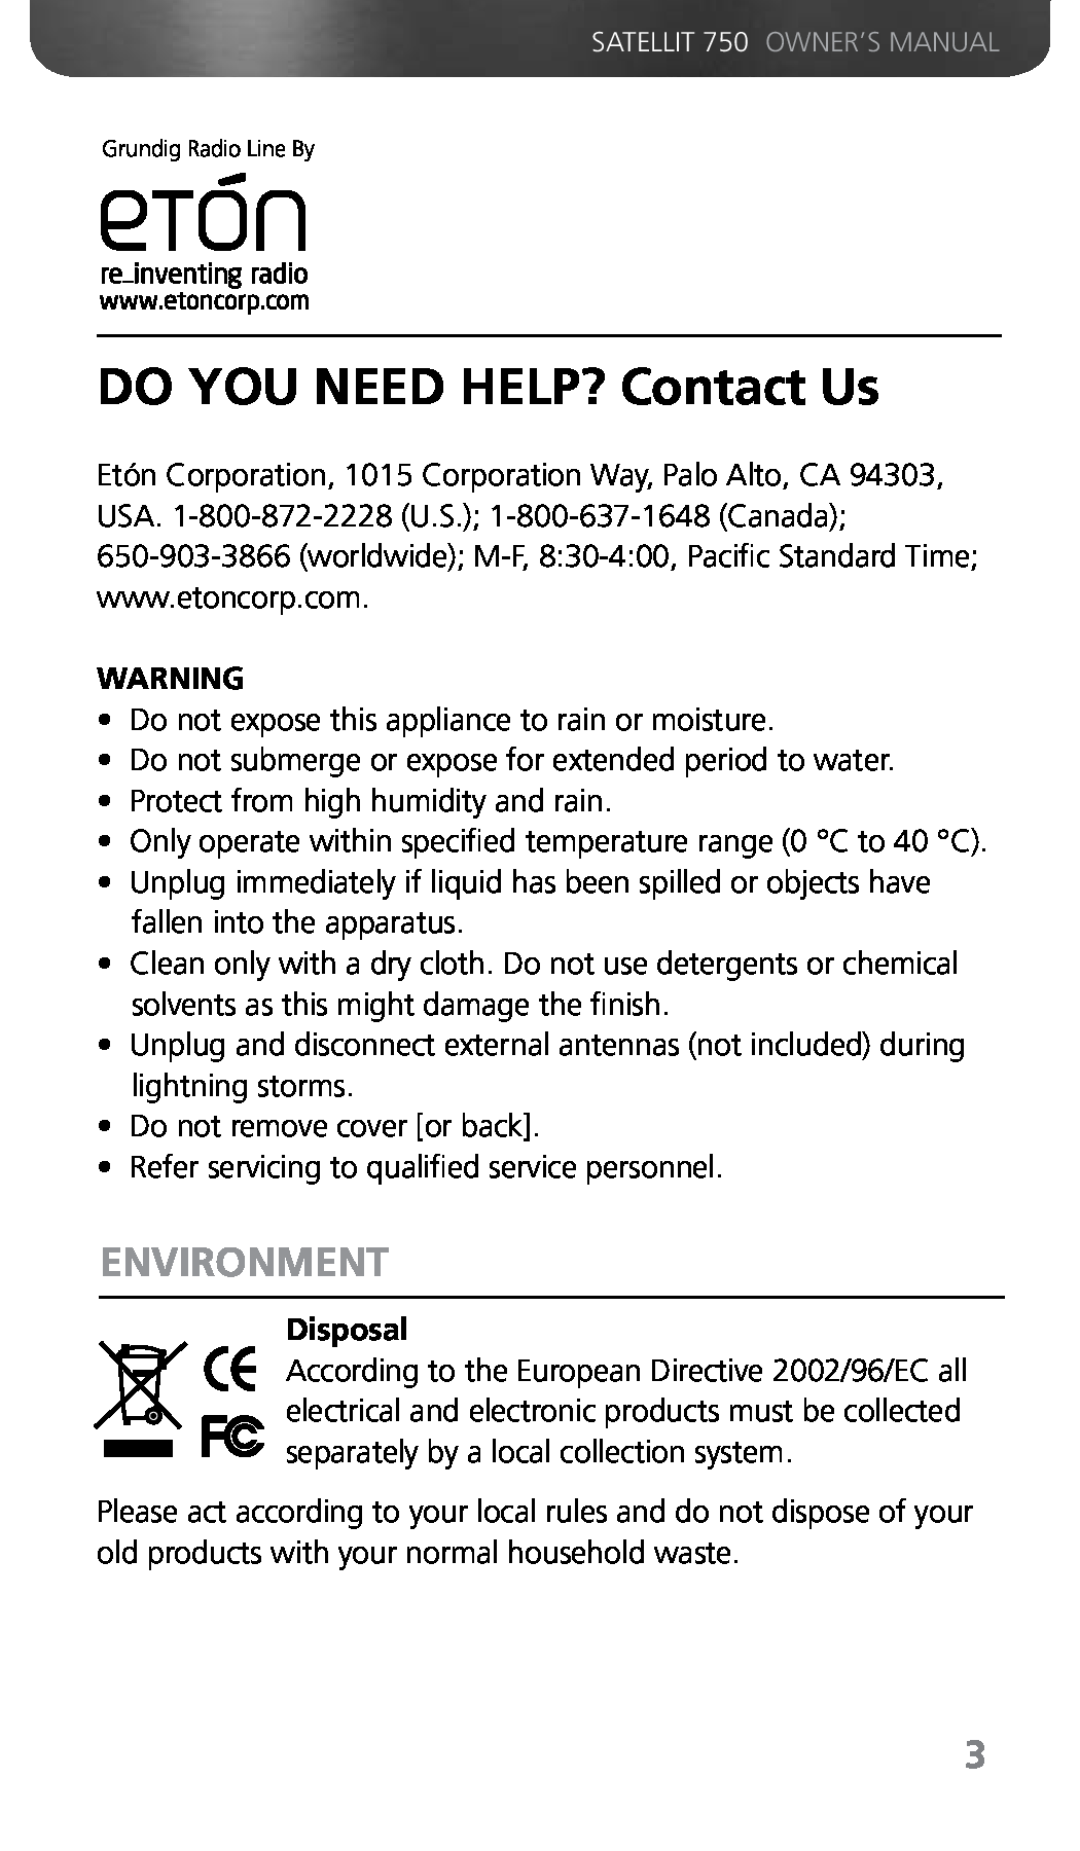 Grundig 750 owner manual DO YOU NEED HELP? Contact Us, Environment, Disposal 